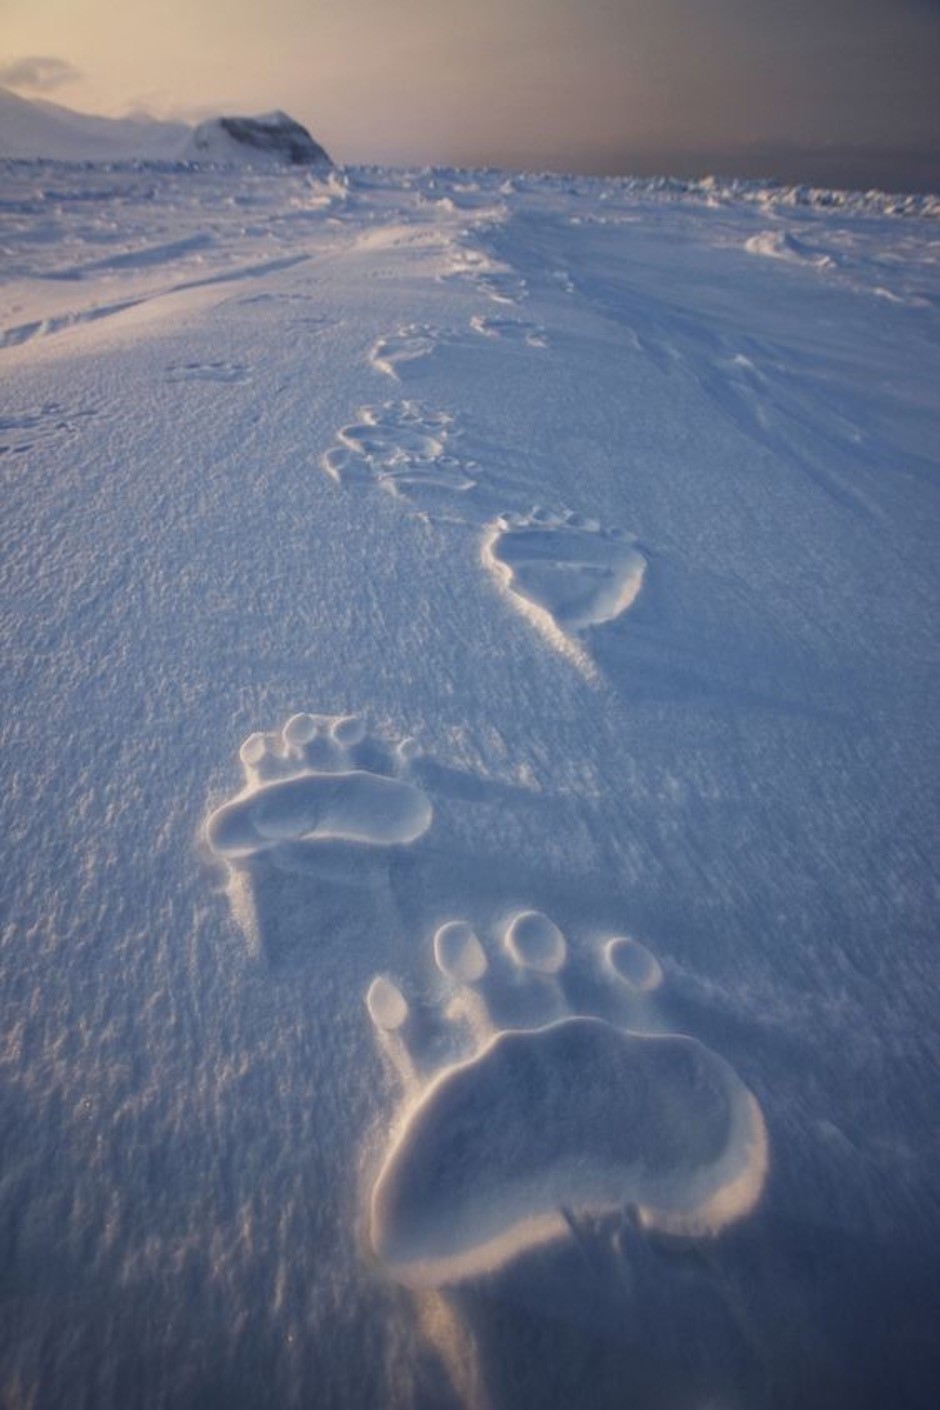 Trail of bear paw prints in the snow with mountains in the background during dusk.